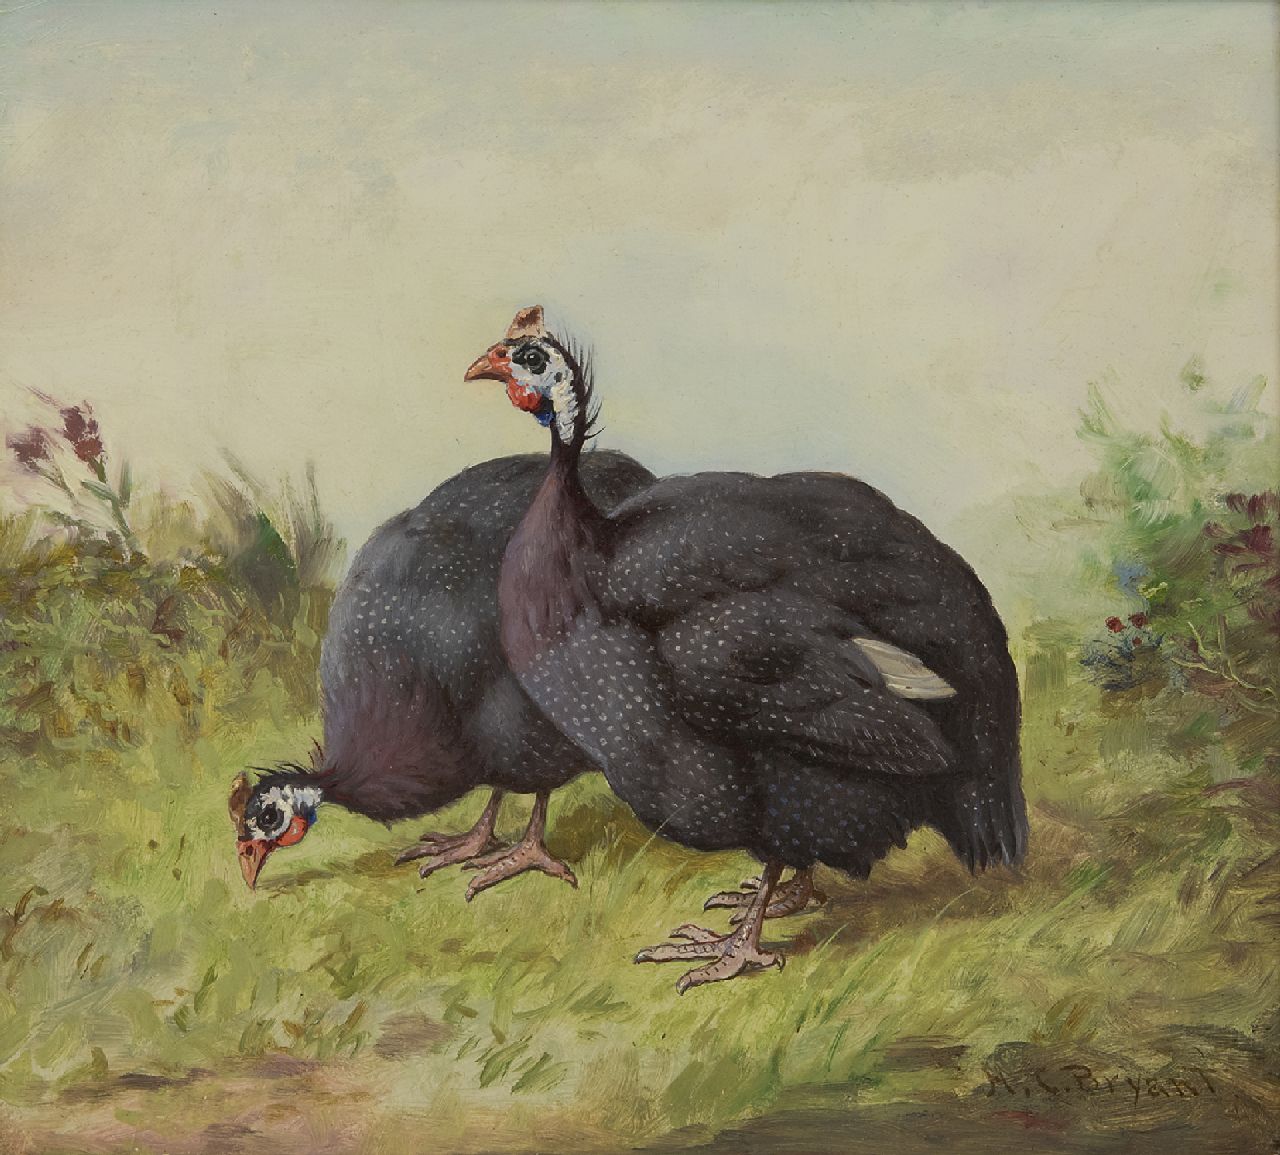 Bryant H.C.  | Henry Charles Bryant | Paintings offered for sale | A pair of guinea fowls, oil on painter's board 27.7 x 30.8 cm, signed l.r.